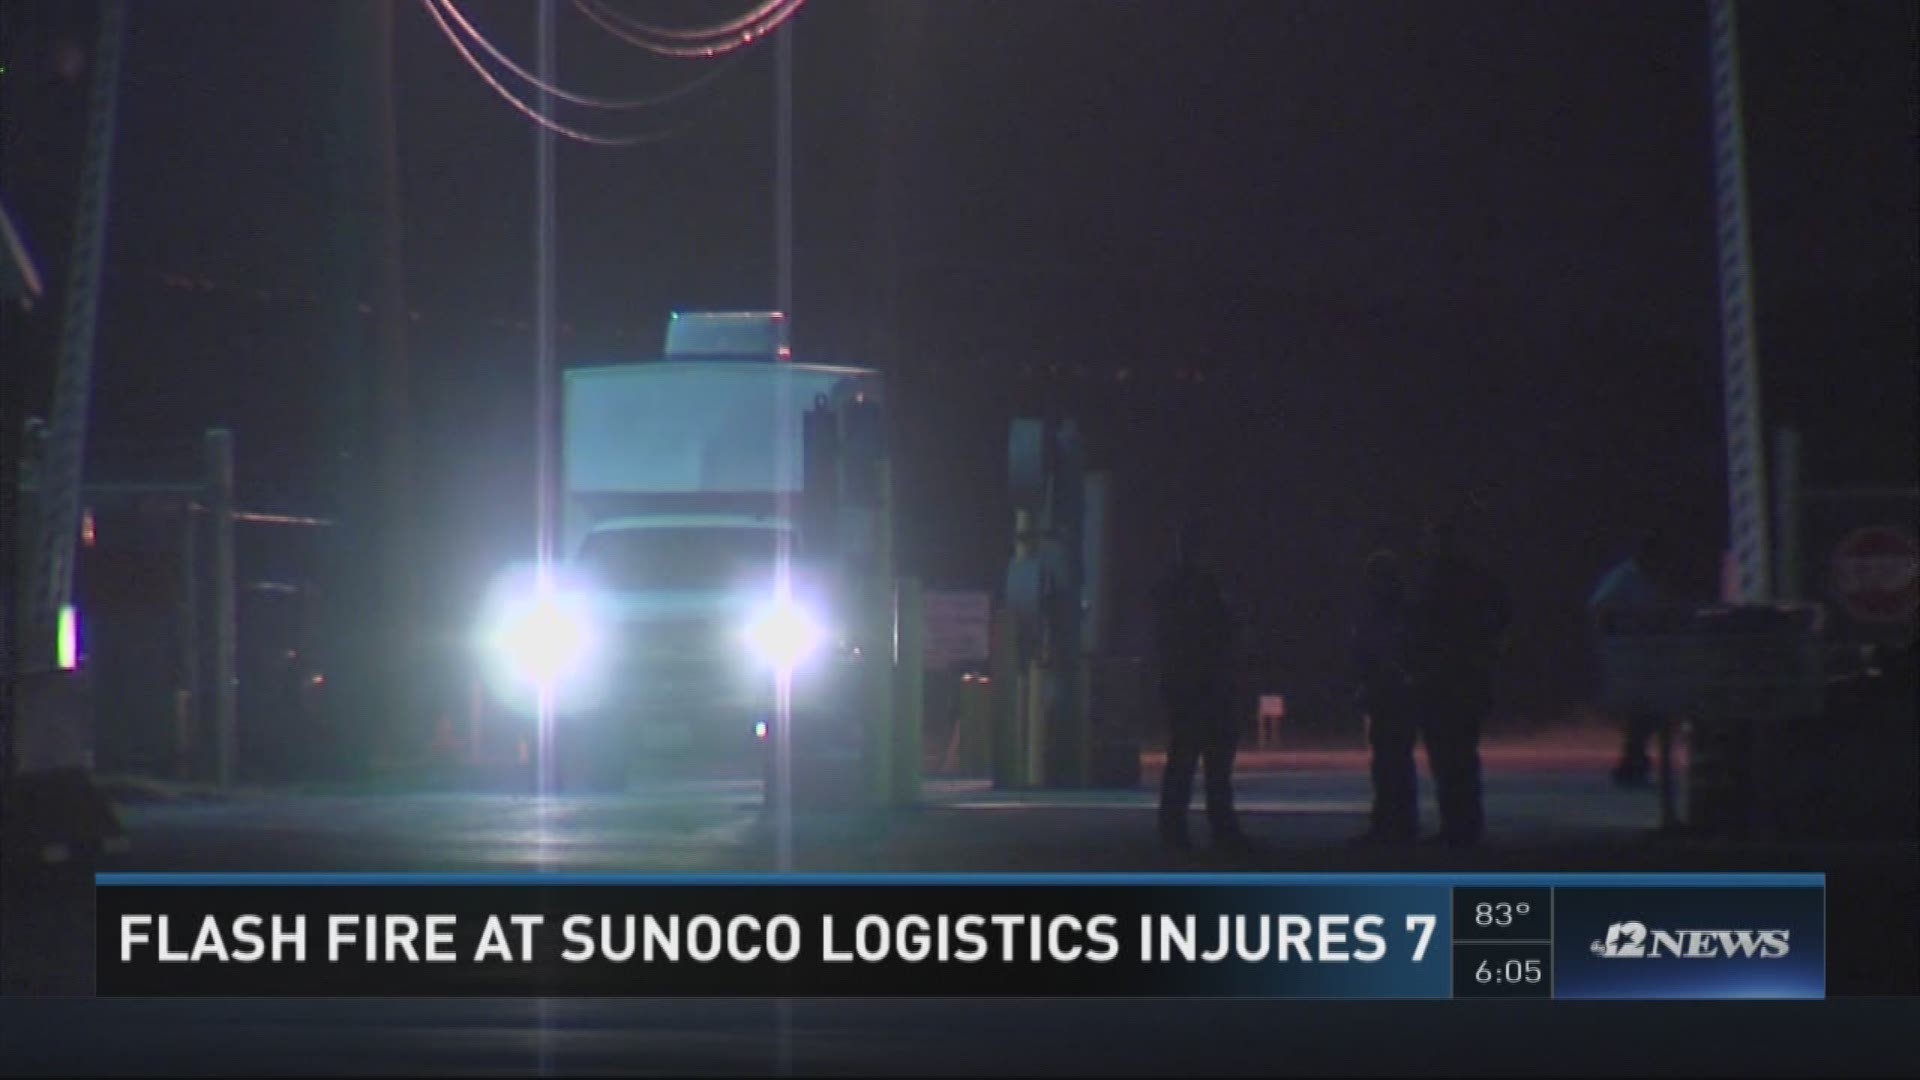 4 still hospitalized with severe injuries after a flash fire erupted at the Sunoco Logistics unit in Nederland.